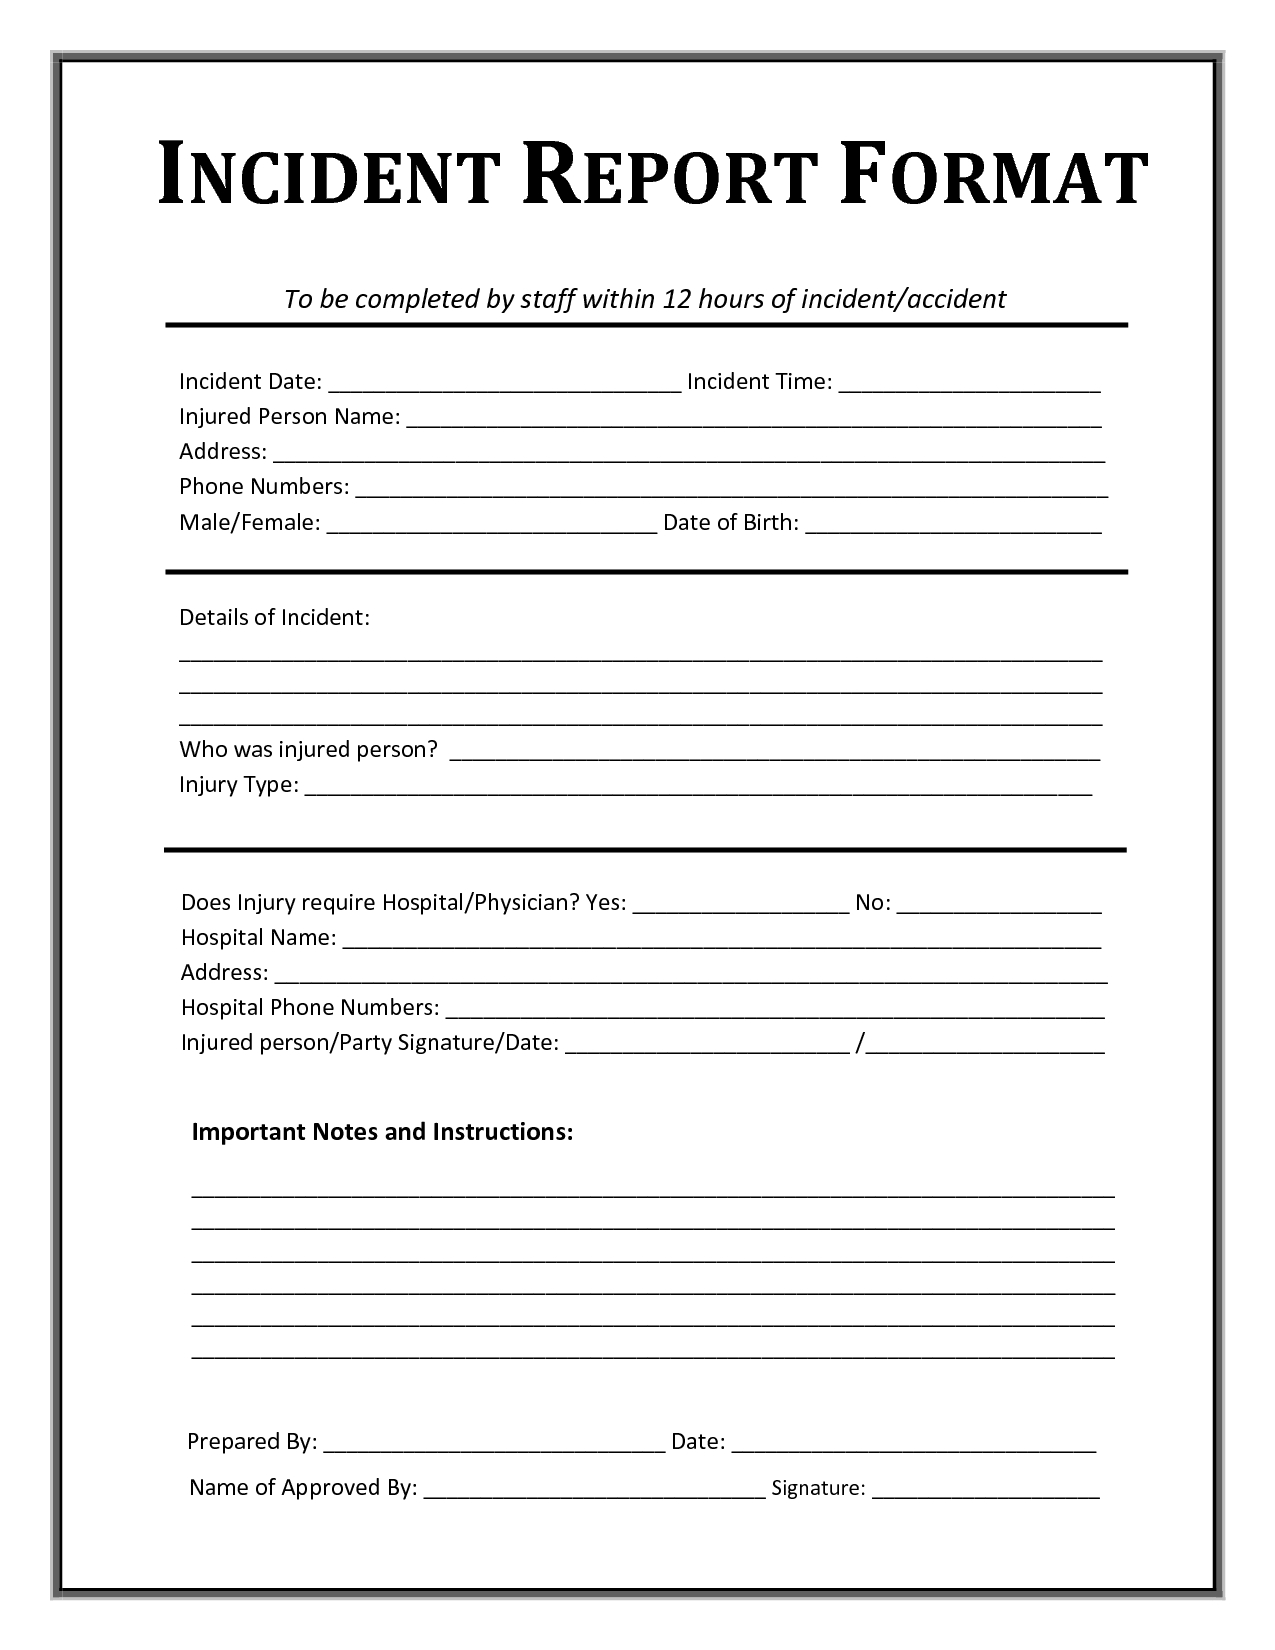 Incident Report Form Template Microsoft Excel  Report Templates inside School Incident Report Template